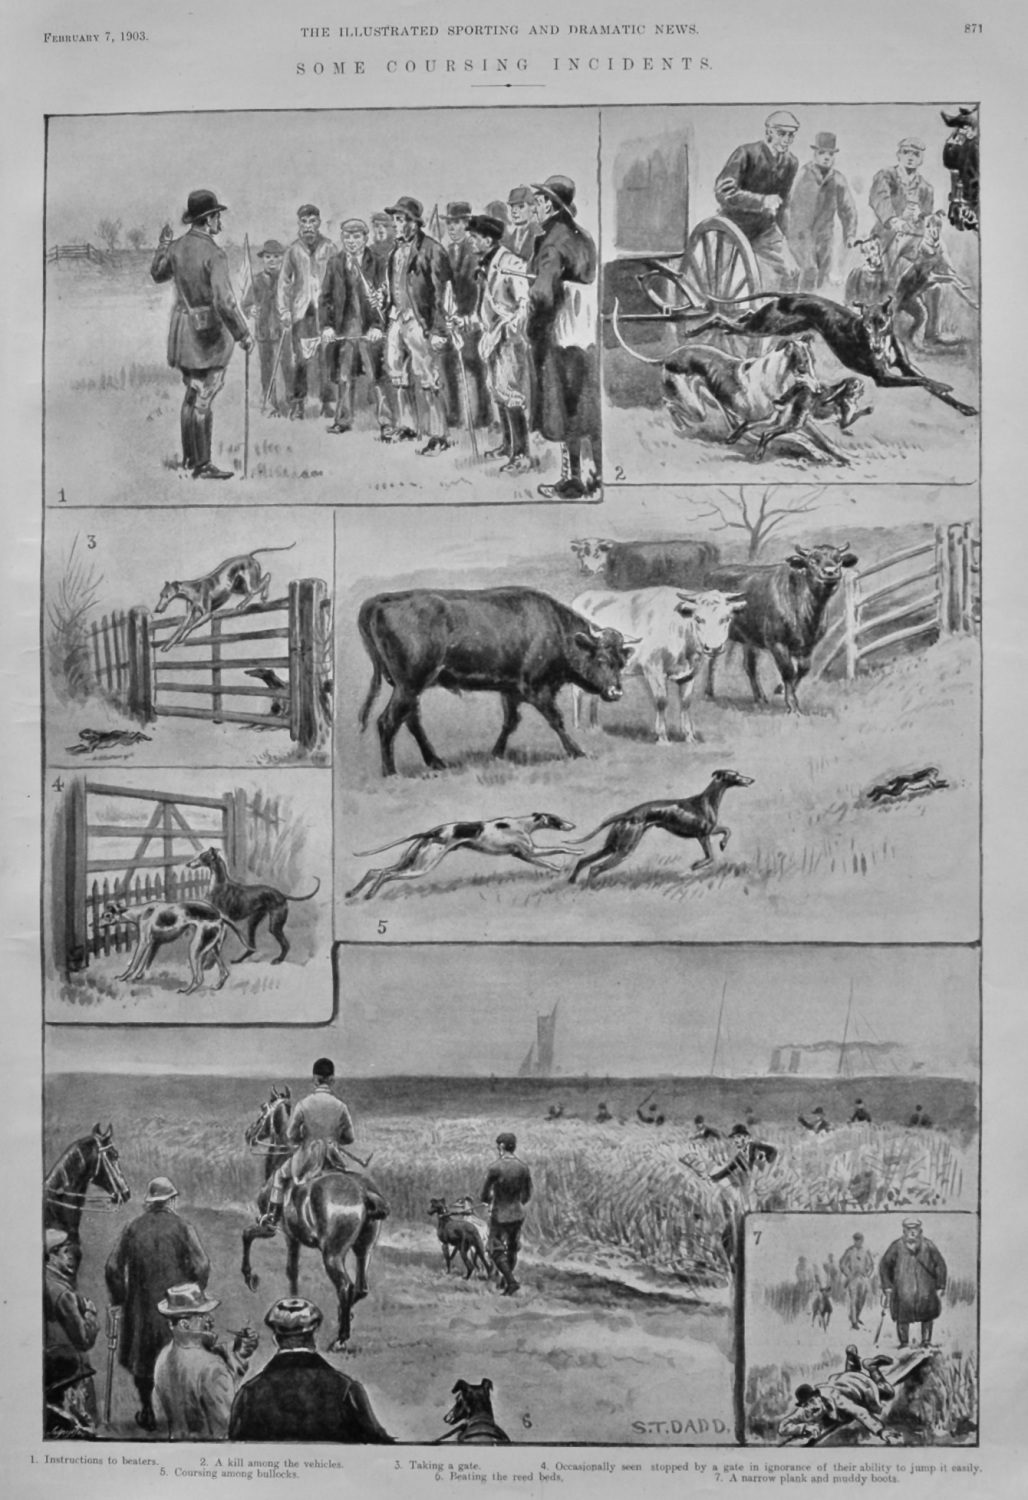 Come Coursing Incidents.  1903.